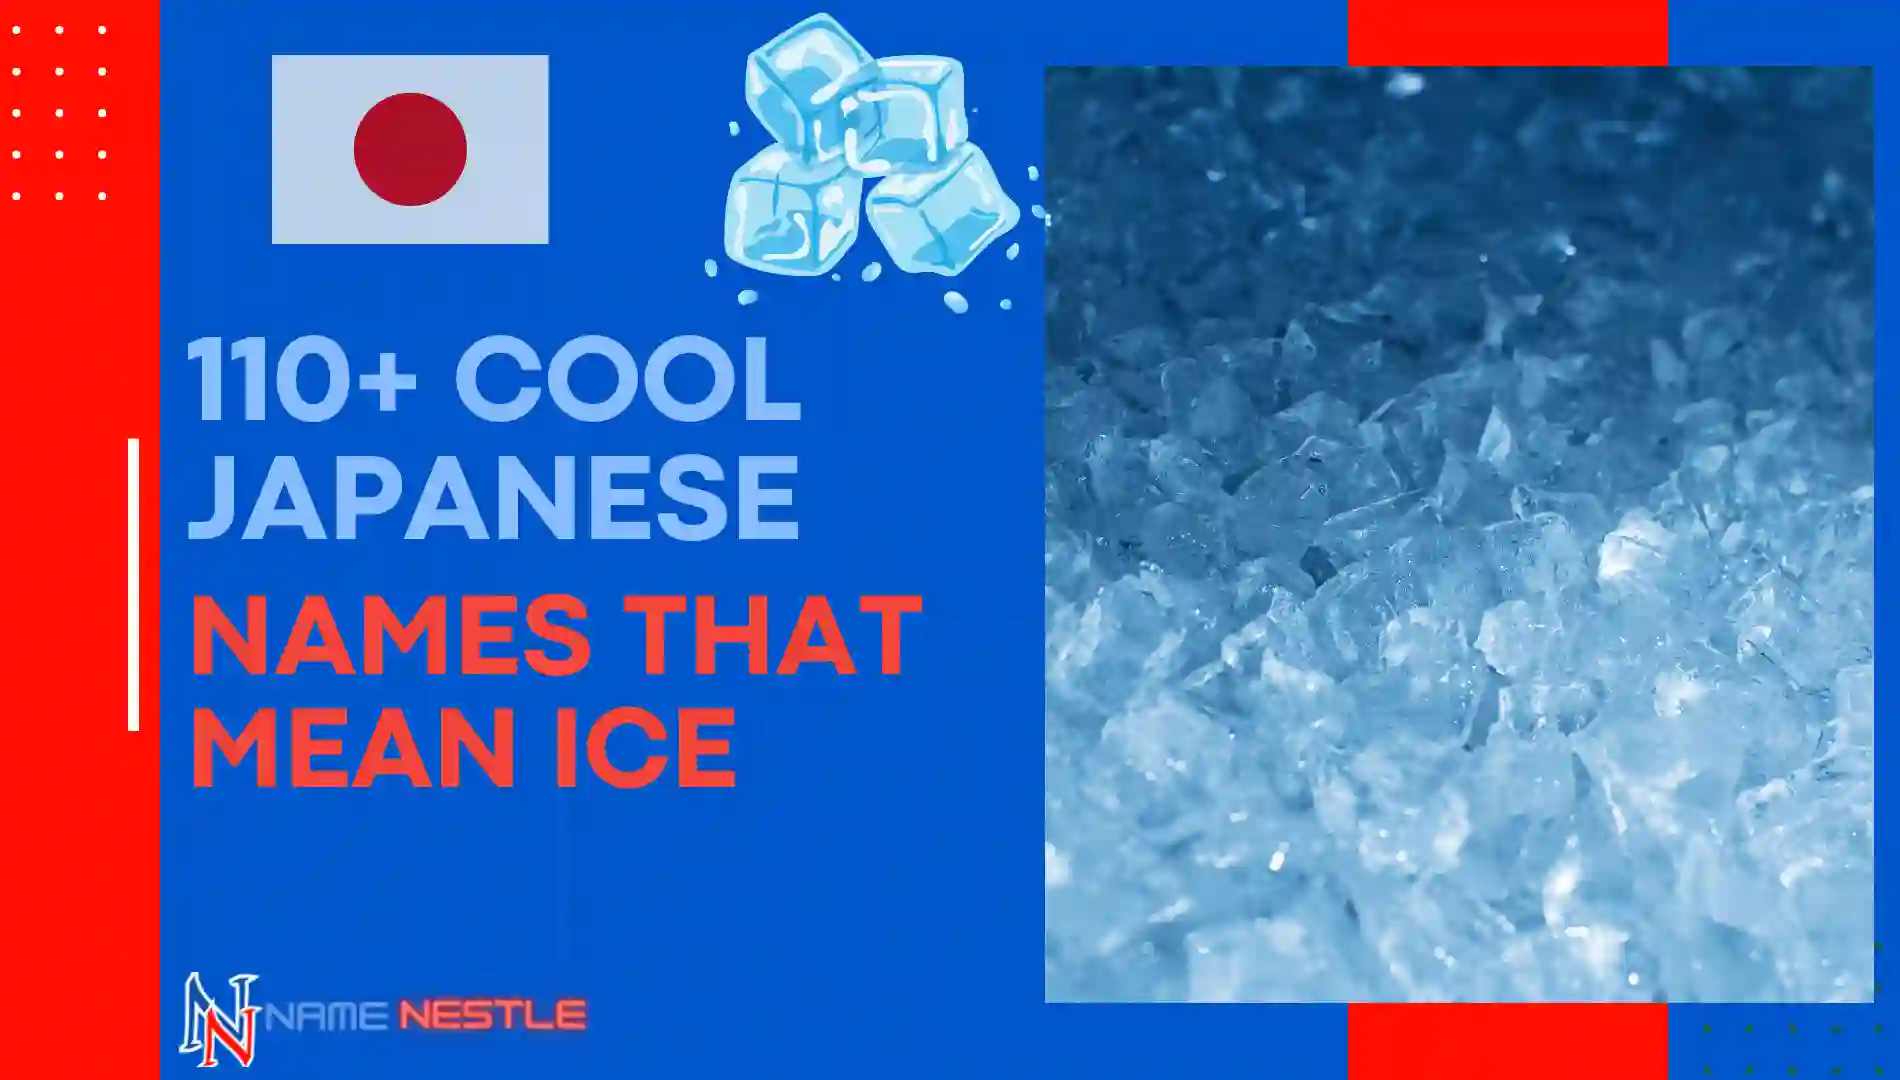 Chill Vibes: Japanese Names That Mean Ice